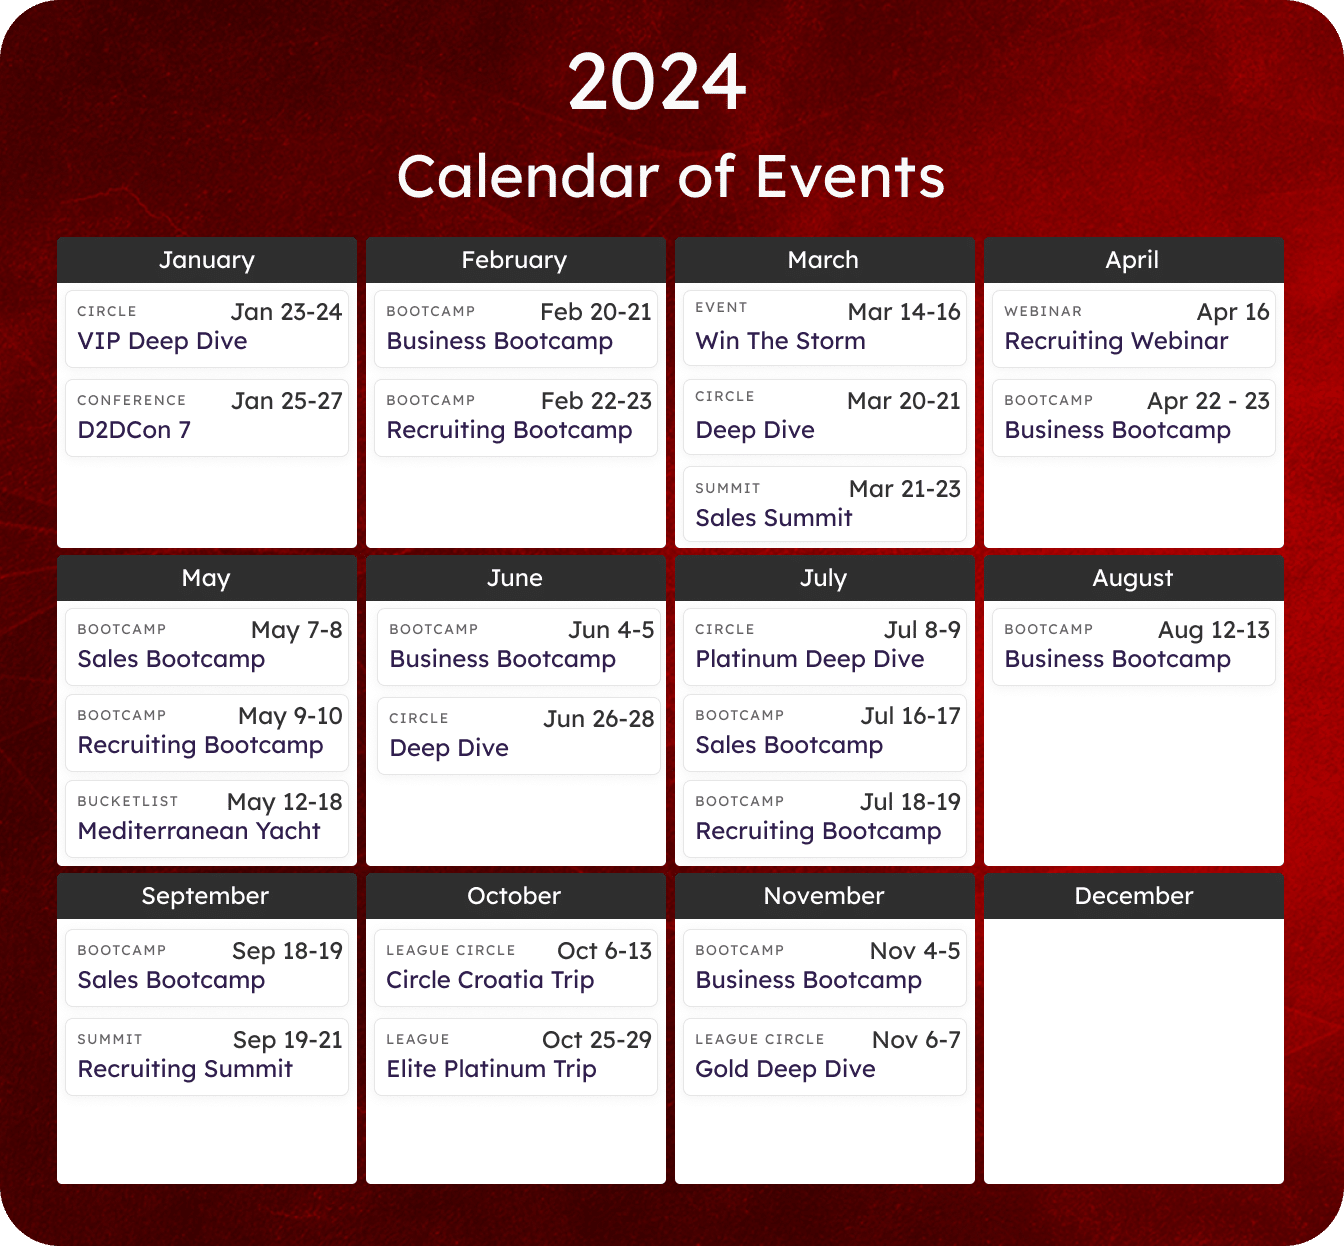 A 2024 Calendar of Events from Circle. The months and corresponding events, including VIP Deep Dive, Business Bootcamps, Recruiting Webinars, Sales Summits, and Mastermind Yacht events, are listed in a grid format. December has no listed events.